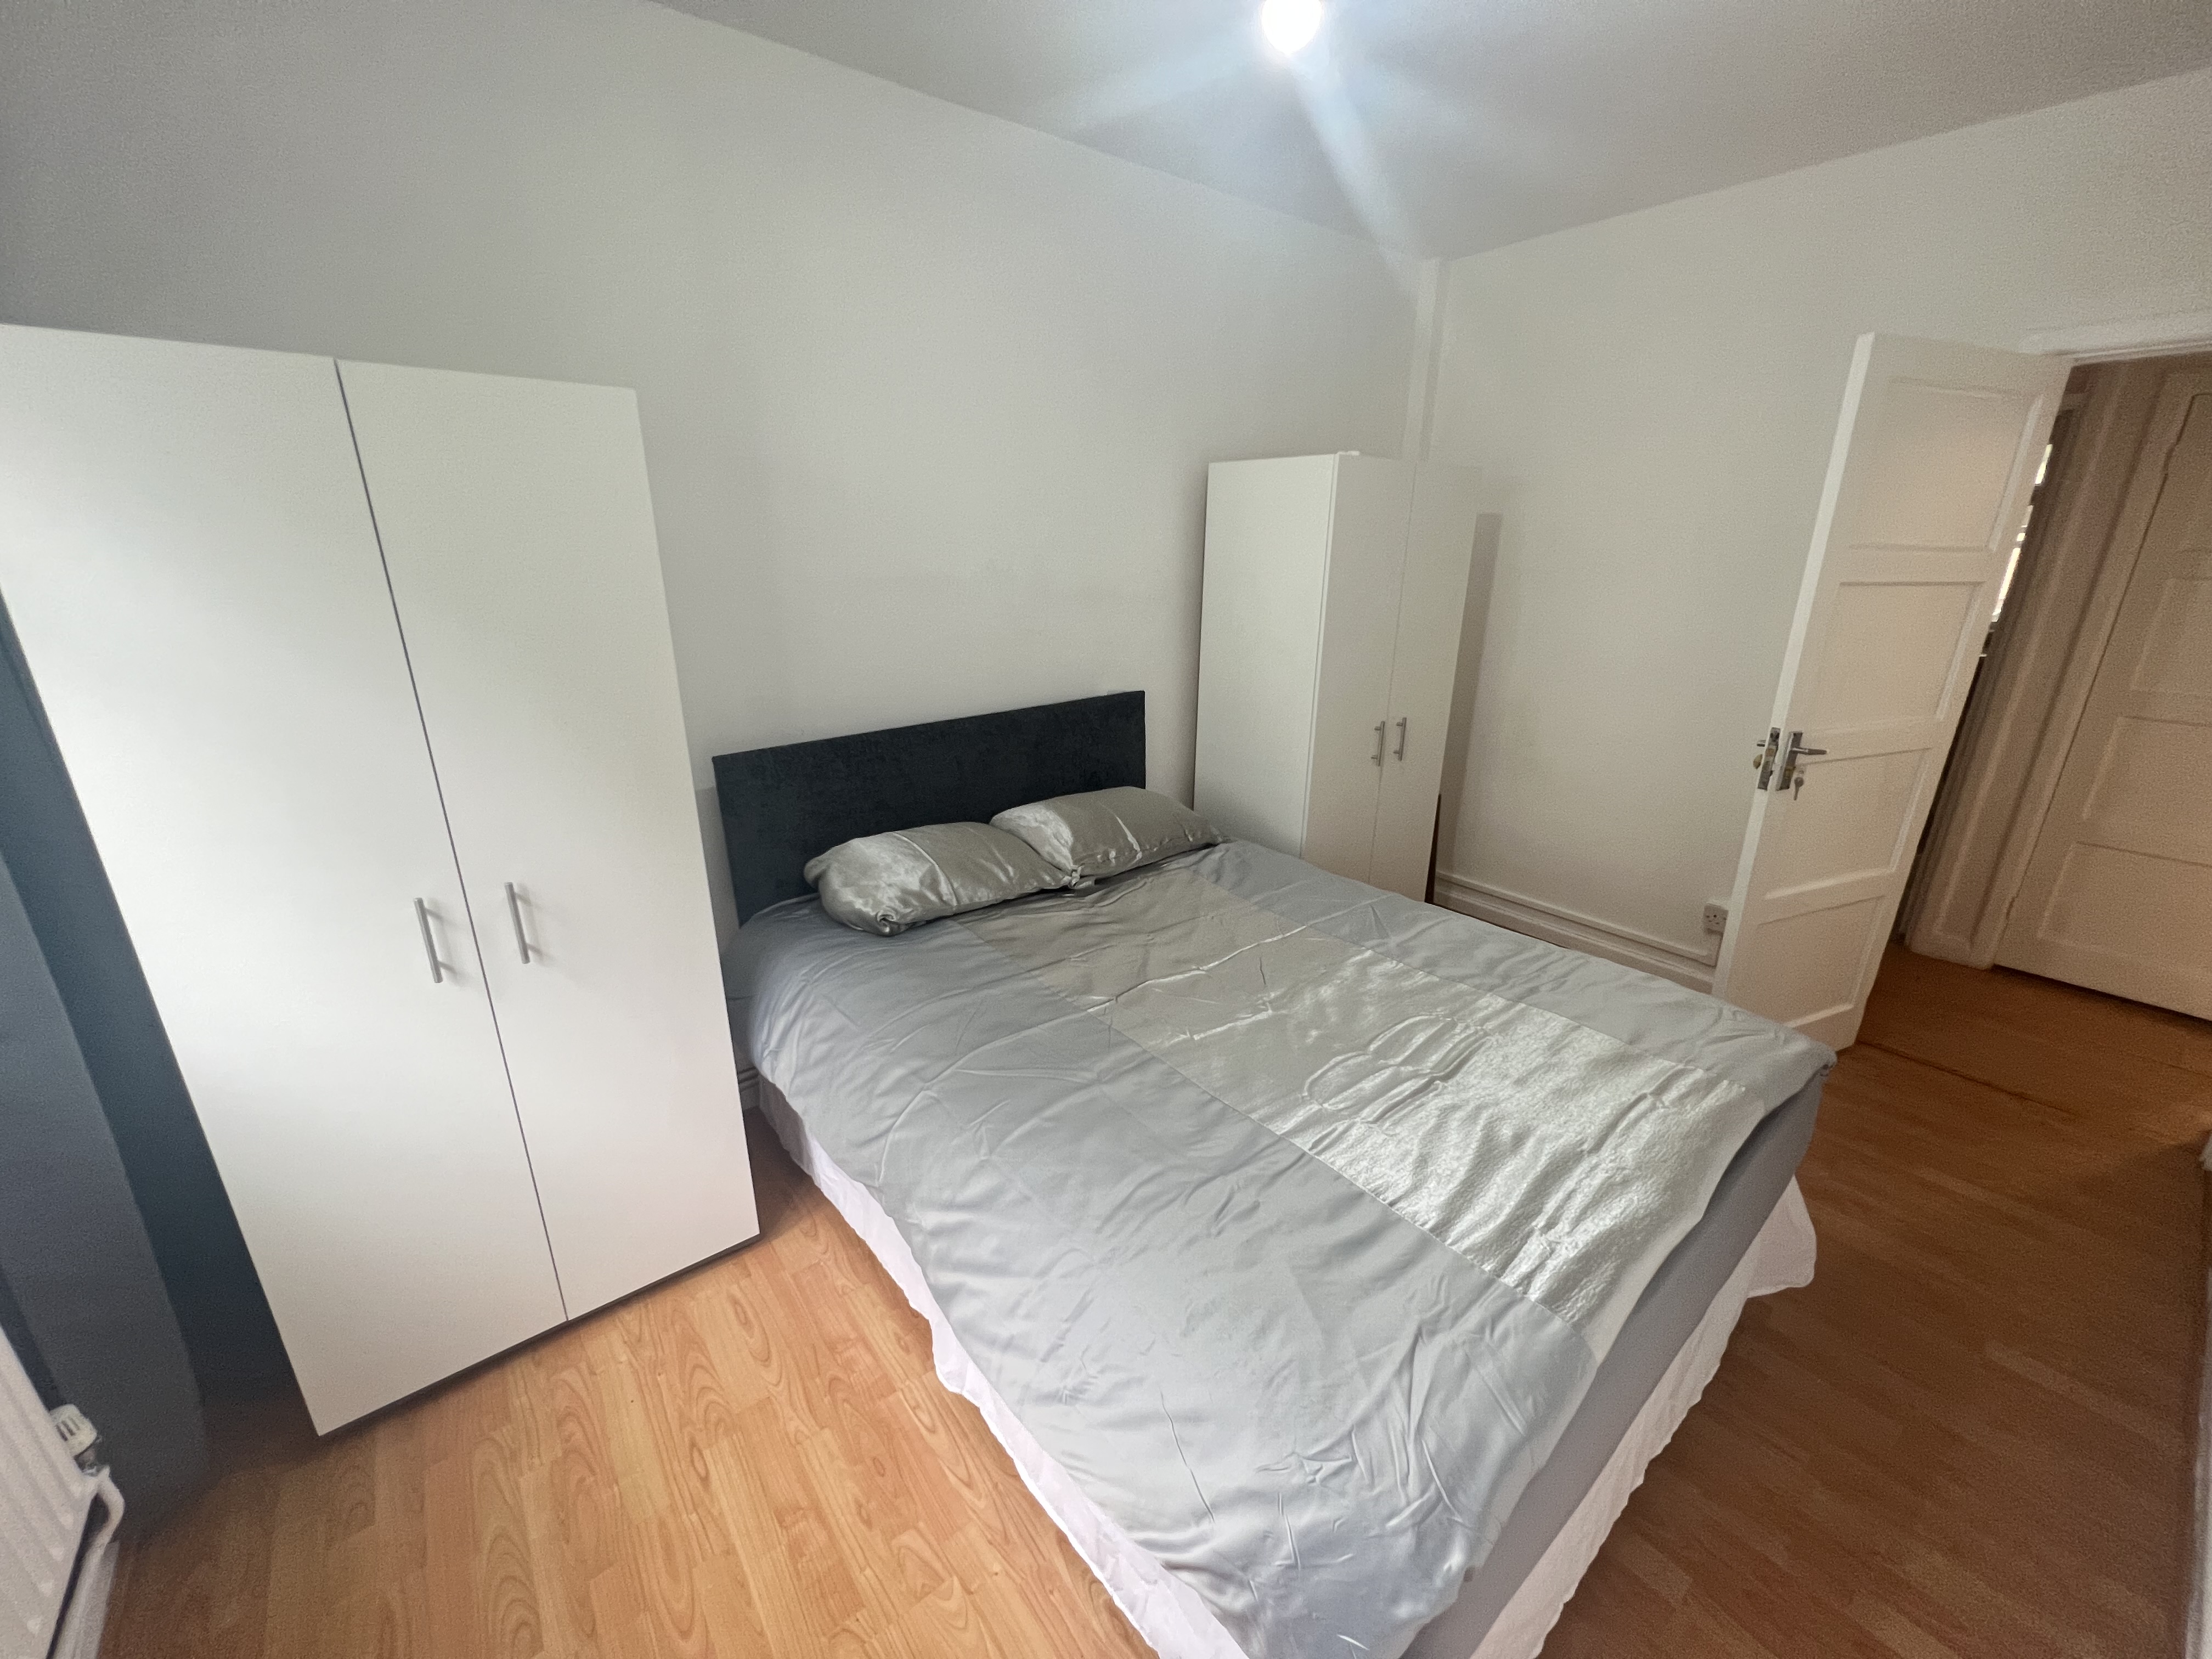 Private room in a shared flat. Zone 1 and 2 RoomsLocal image